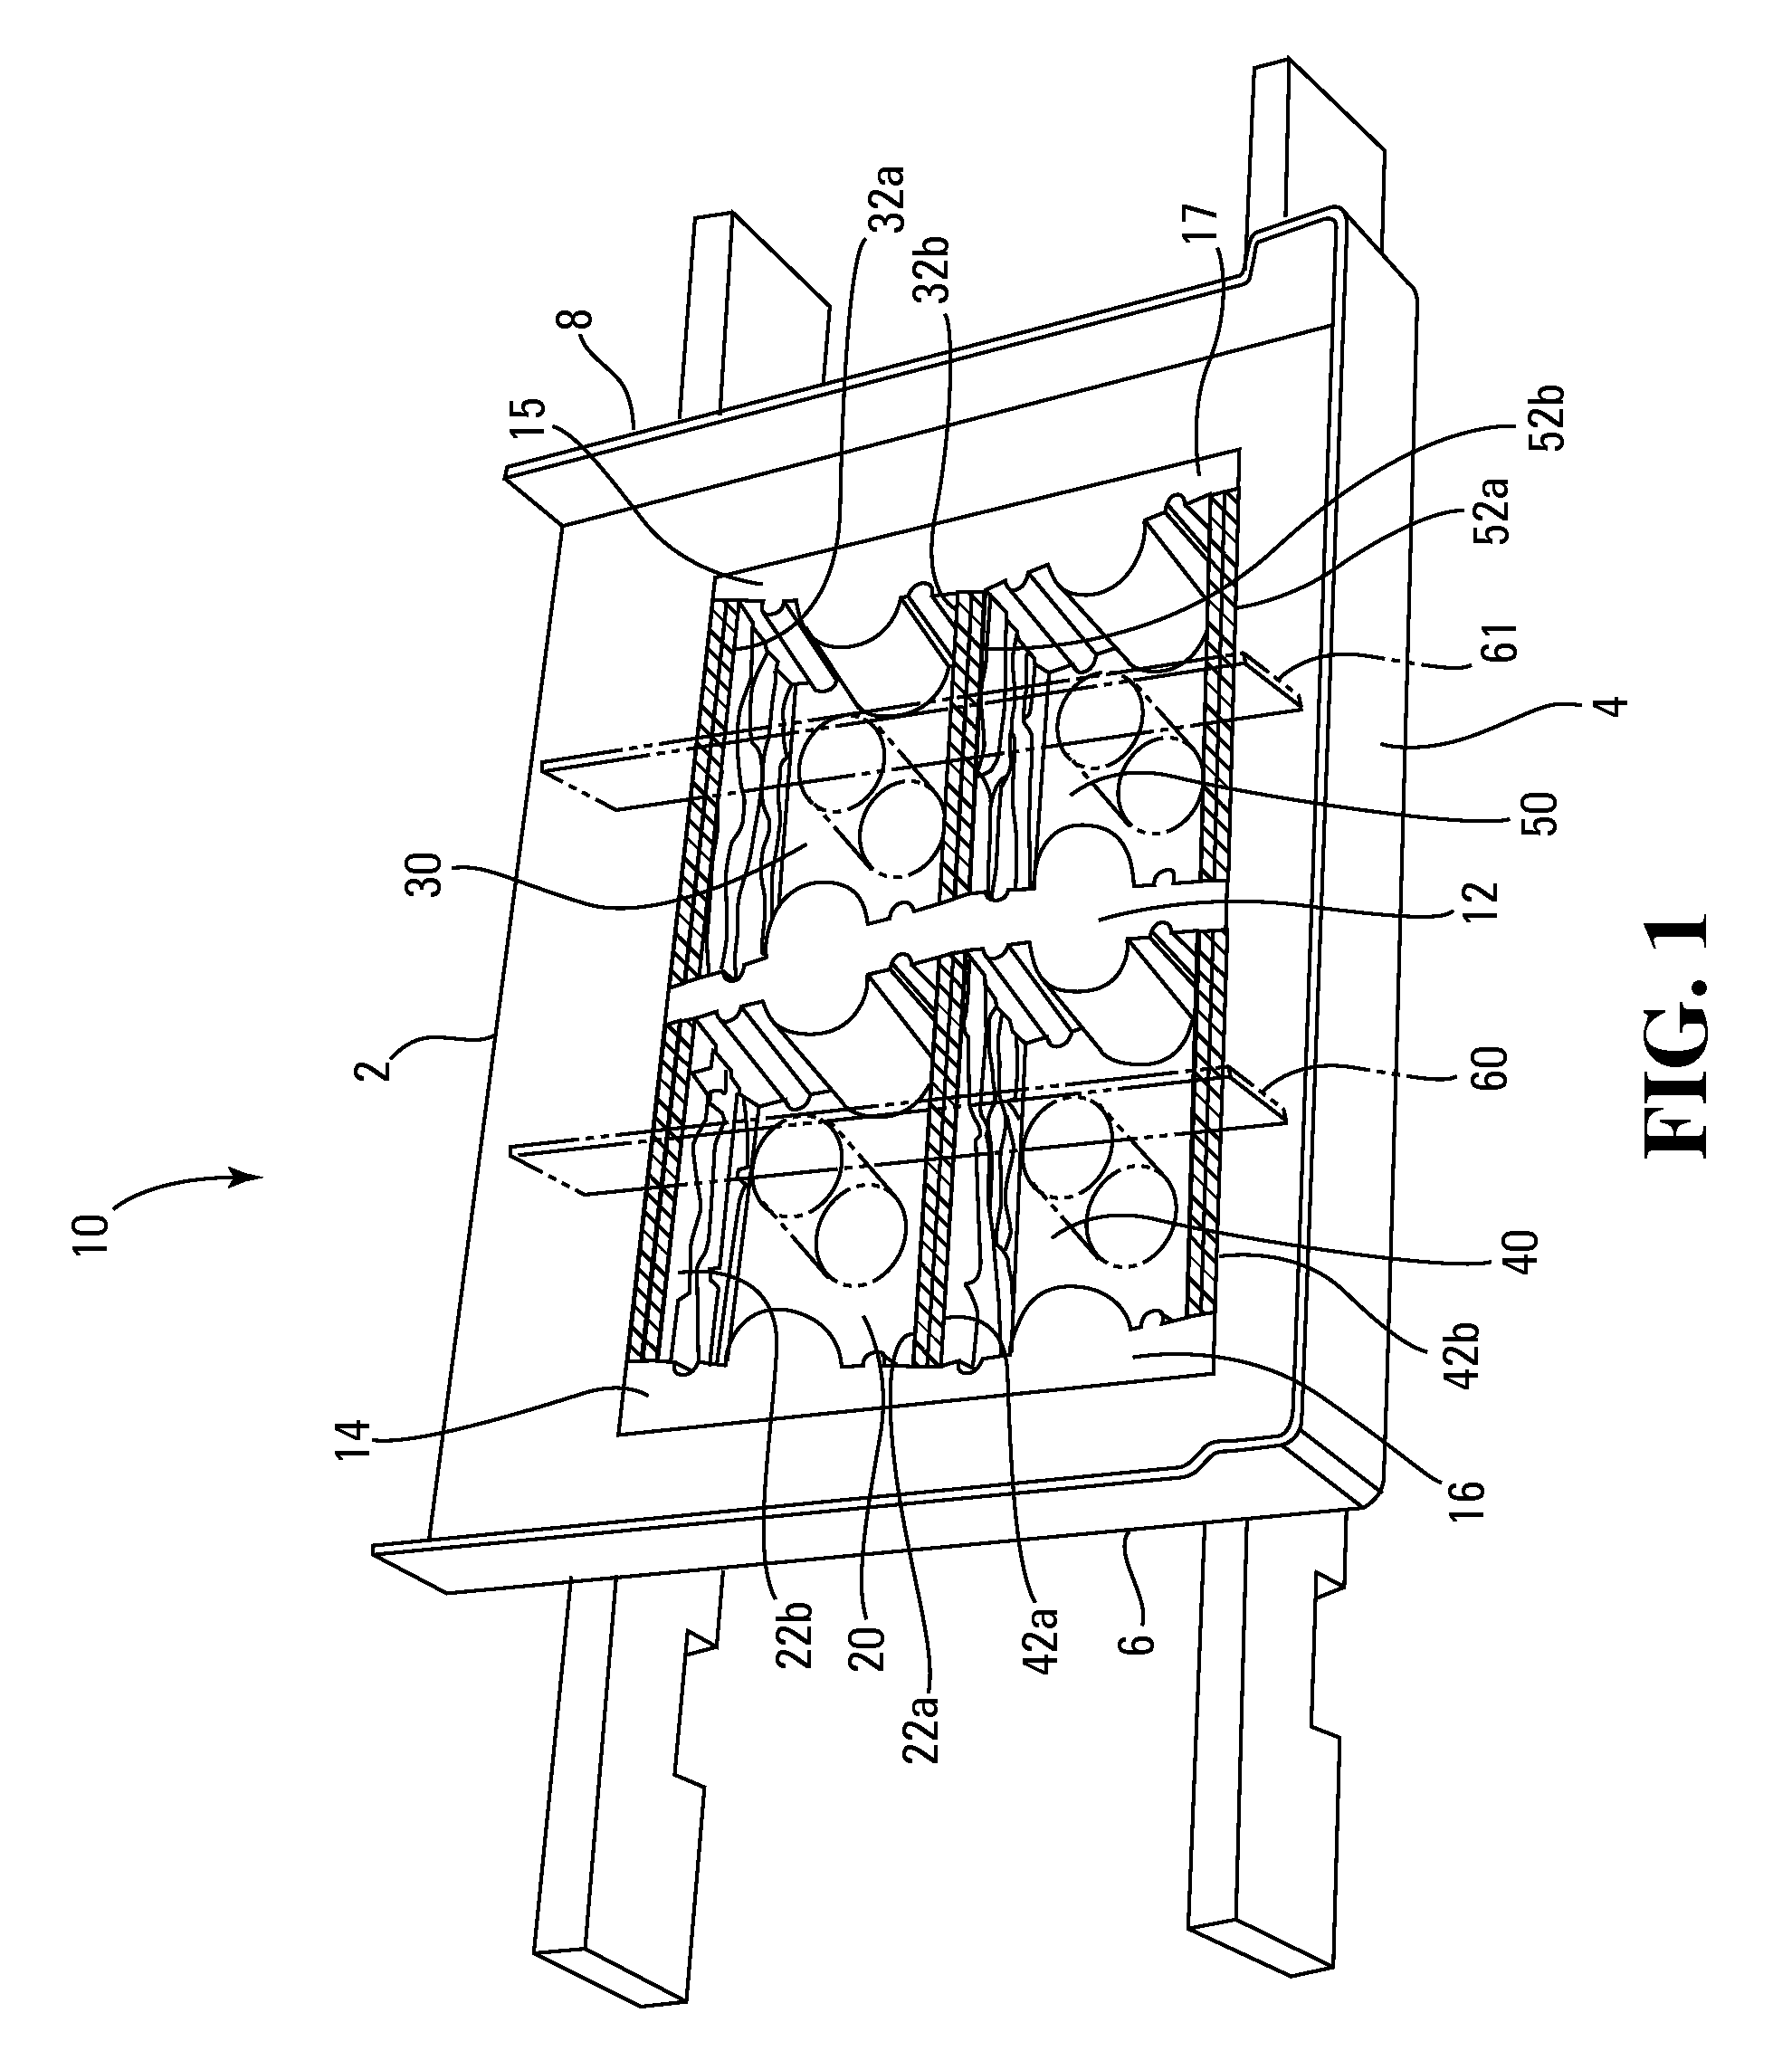 Mold box and method of manufacturing a block